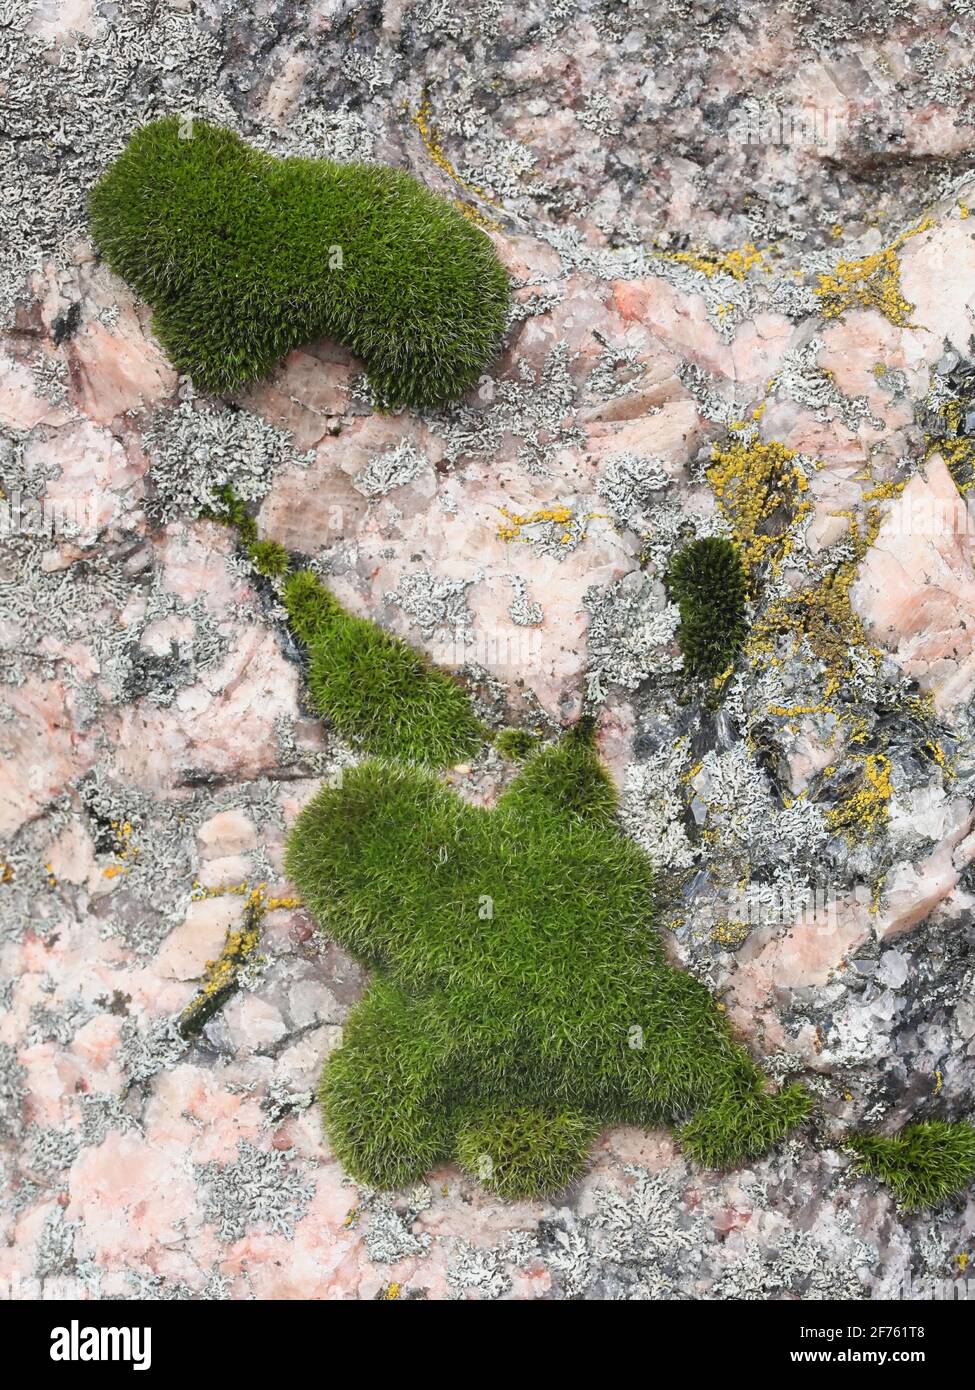 Grimmia muehlenbeckii, a tufted rock moss from Finland with no common English name Stock Photo